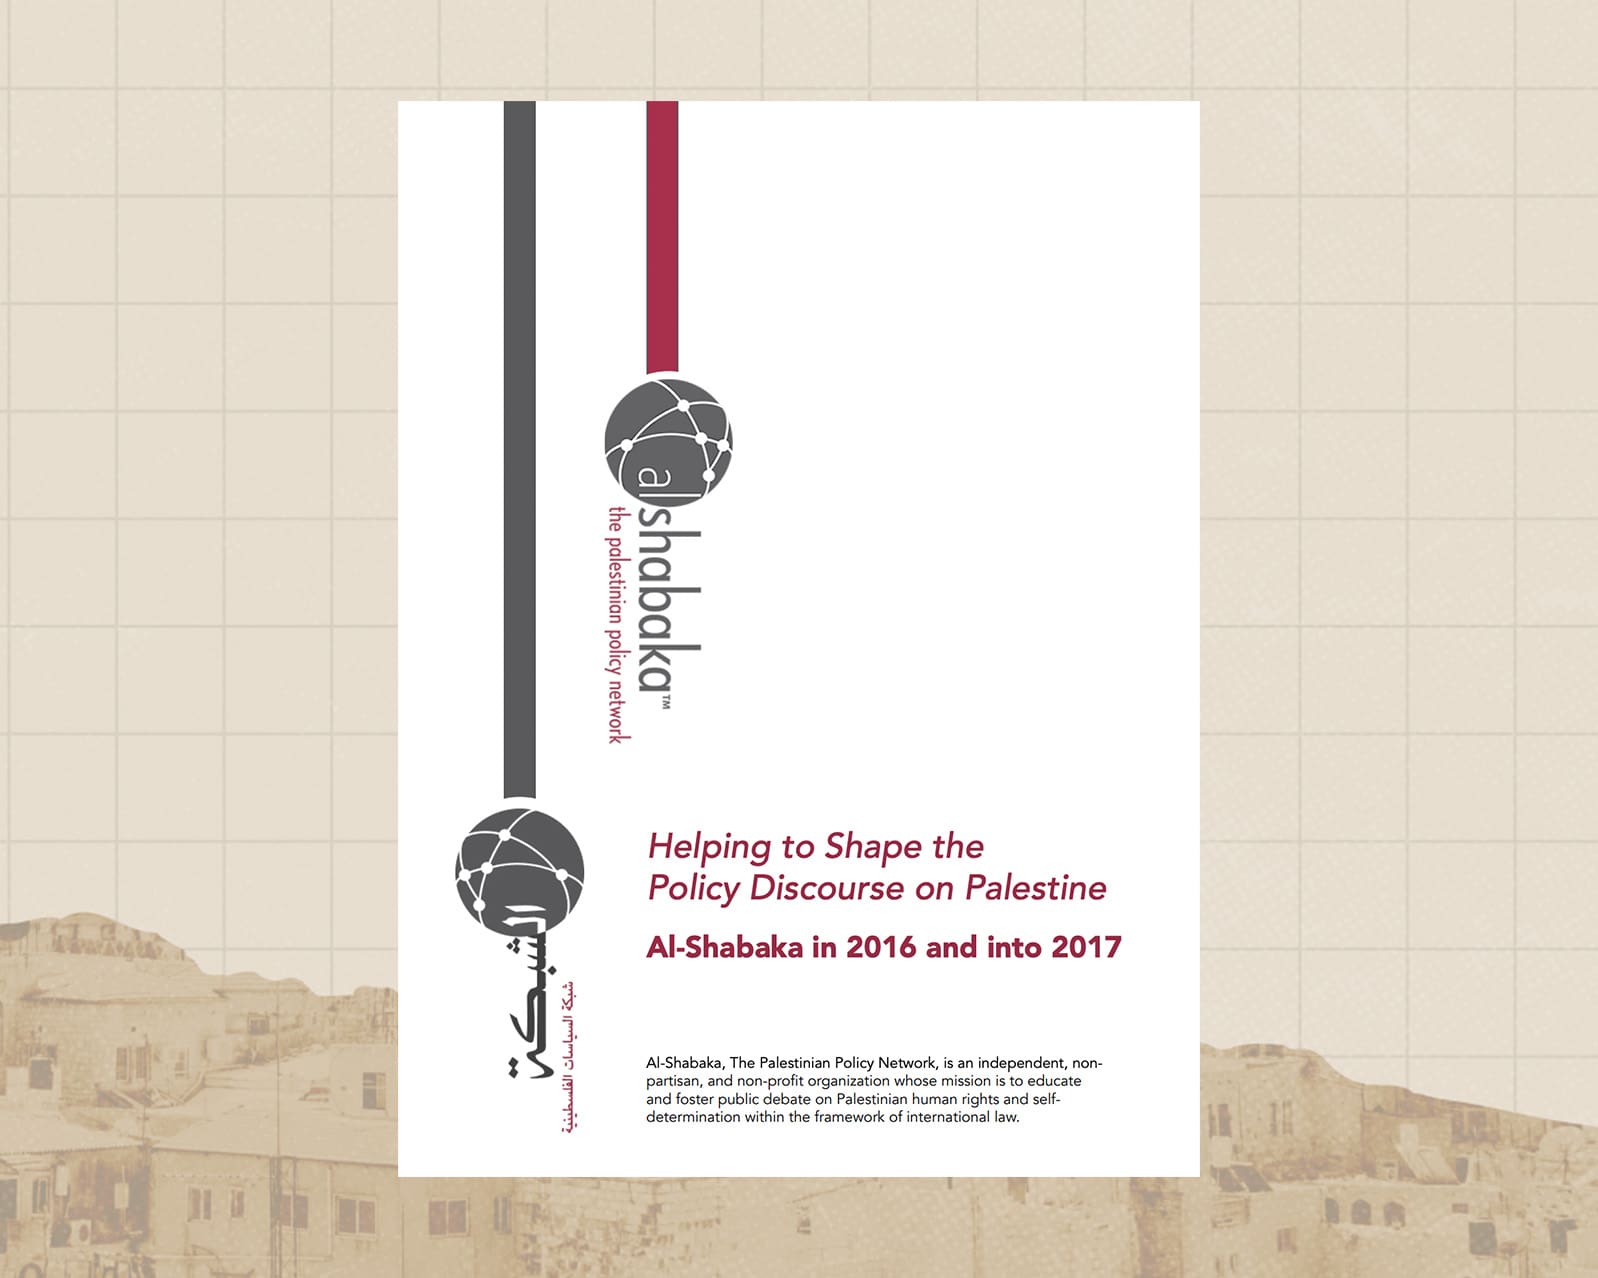 Article - Introducing the second visual from joint coalition with Visualizing Palestine: “Residency Revocation: Israel’s Forcible Transfer of Palestinians from Jerusalem